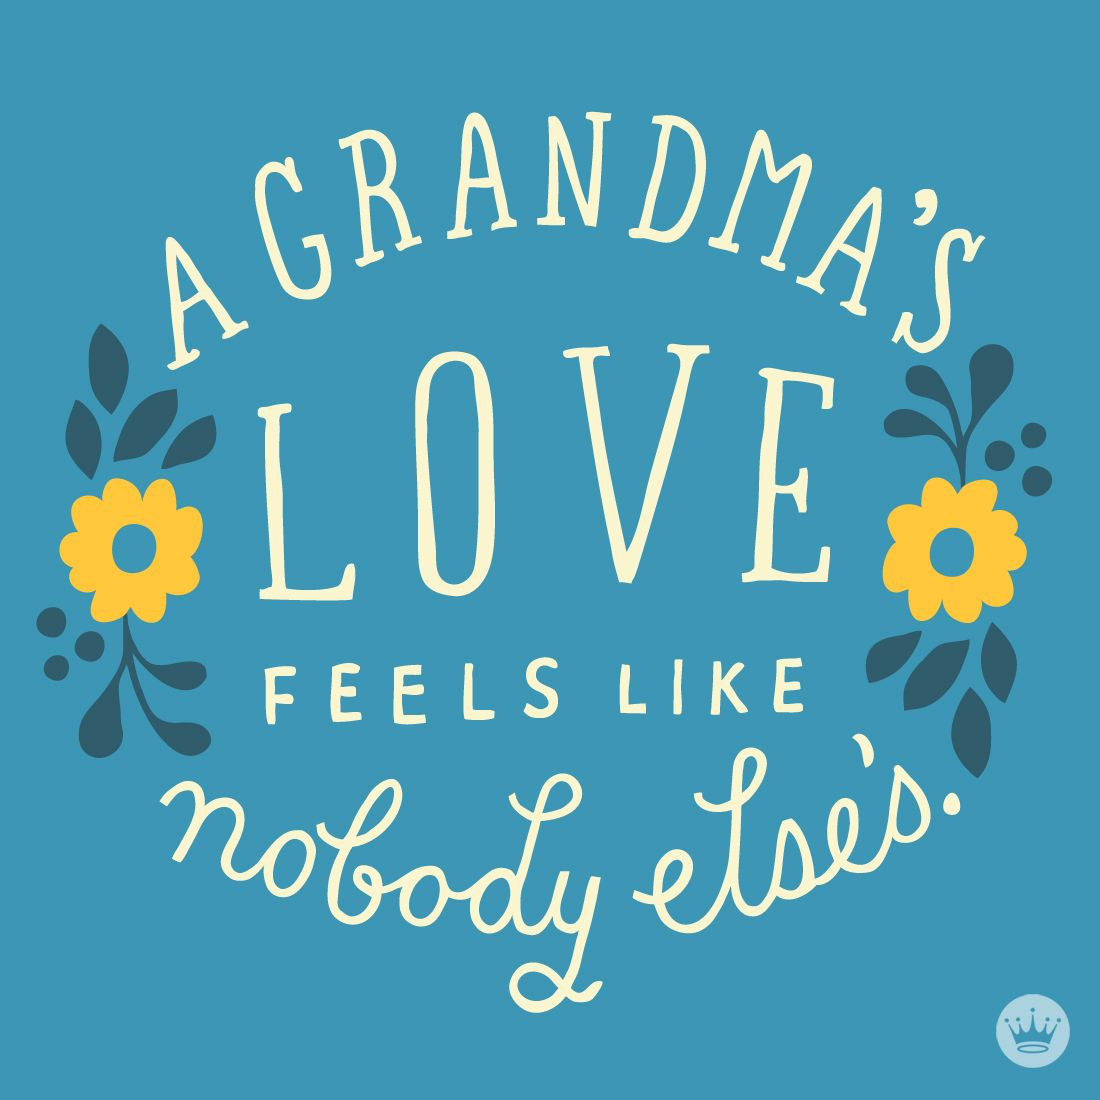 Grandmother Granddaughter Quotes
 The perfect quote for a grandmother you love